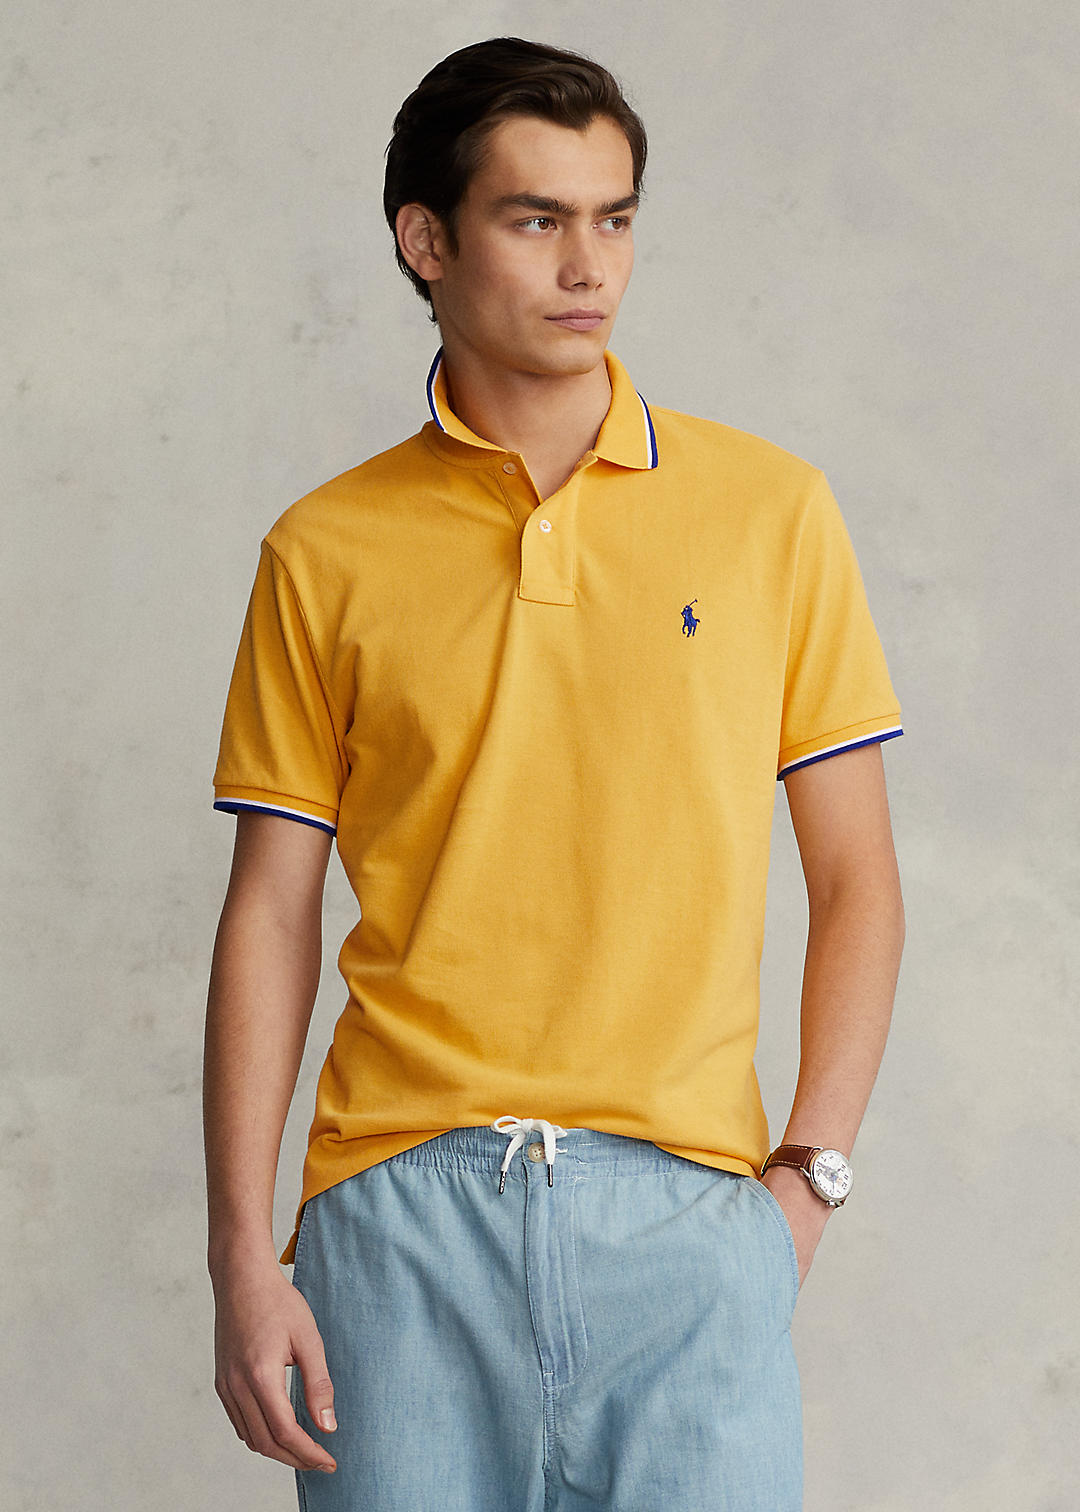 Classic Fit Contrast-Tipped Mesh Polo Shirt